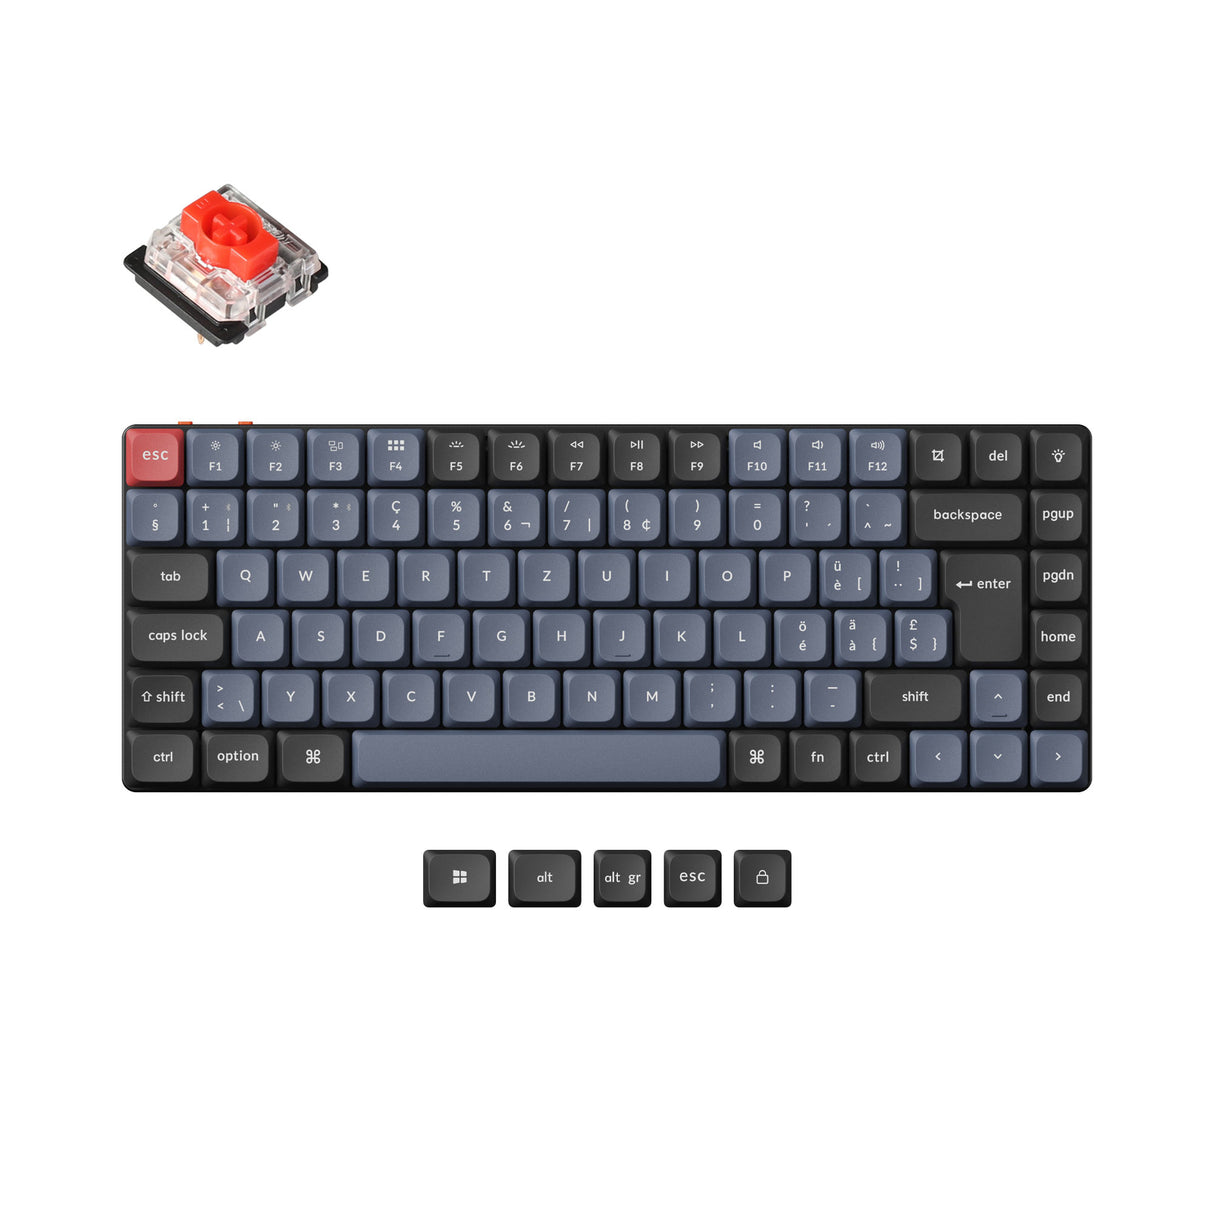 Keychron K3 Pro QMK VIA low profile custom mechanical keyboard 75 percent layout PBT Keycaps hot-swappable Gateron low profile switch red ISO Swiss layout